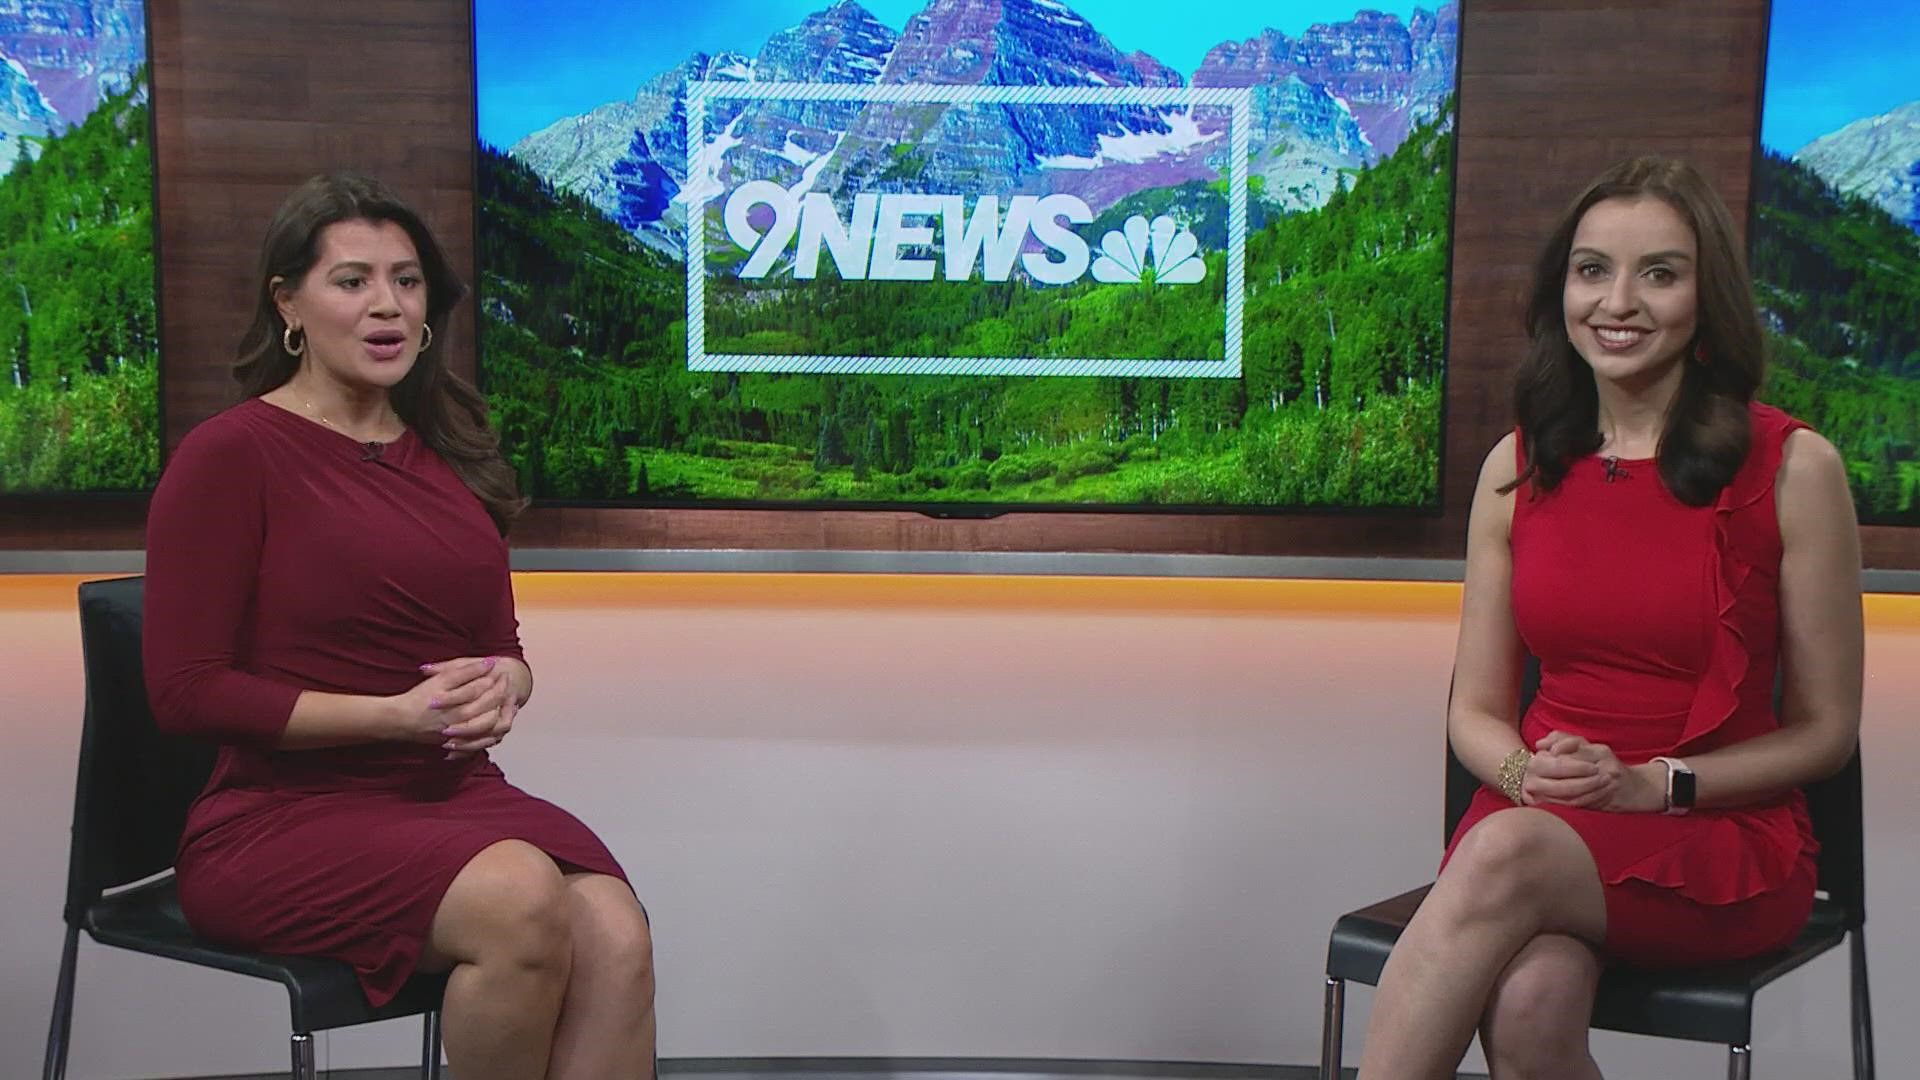 Wear Red Day emphasized heart health in women. Dr. Payal Kohli talks more about the day.